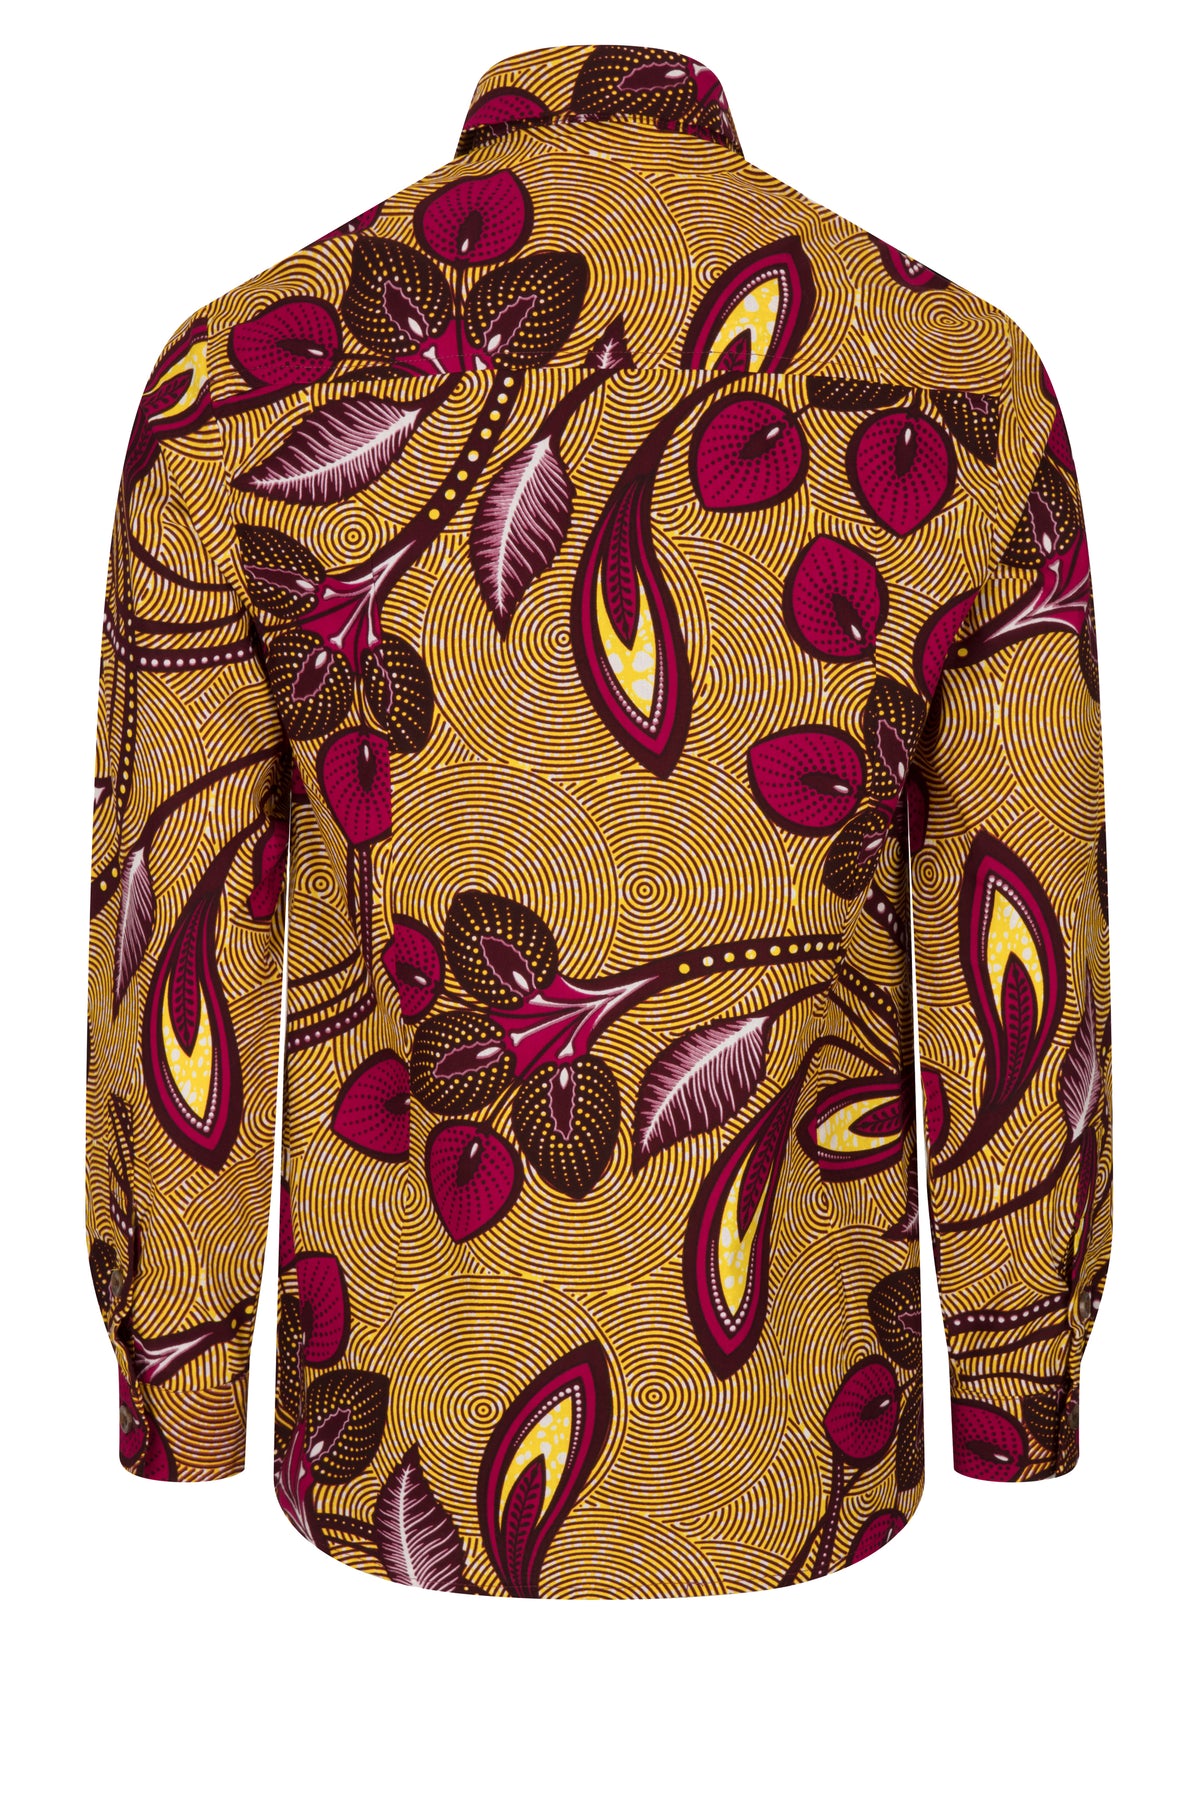 Men's Long sleeve African print shirt-Wine Floral - OHEMA OHENE AFRICAN INSPIRED FASHION